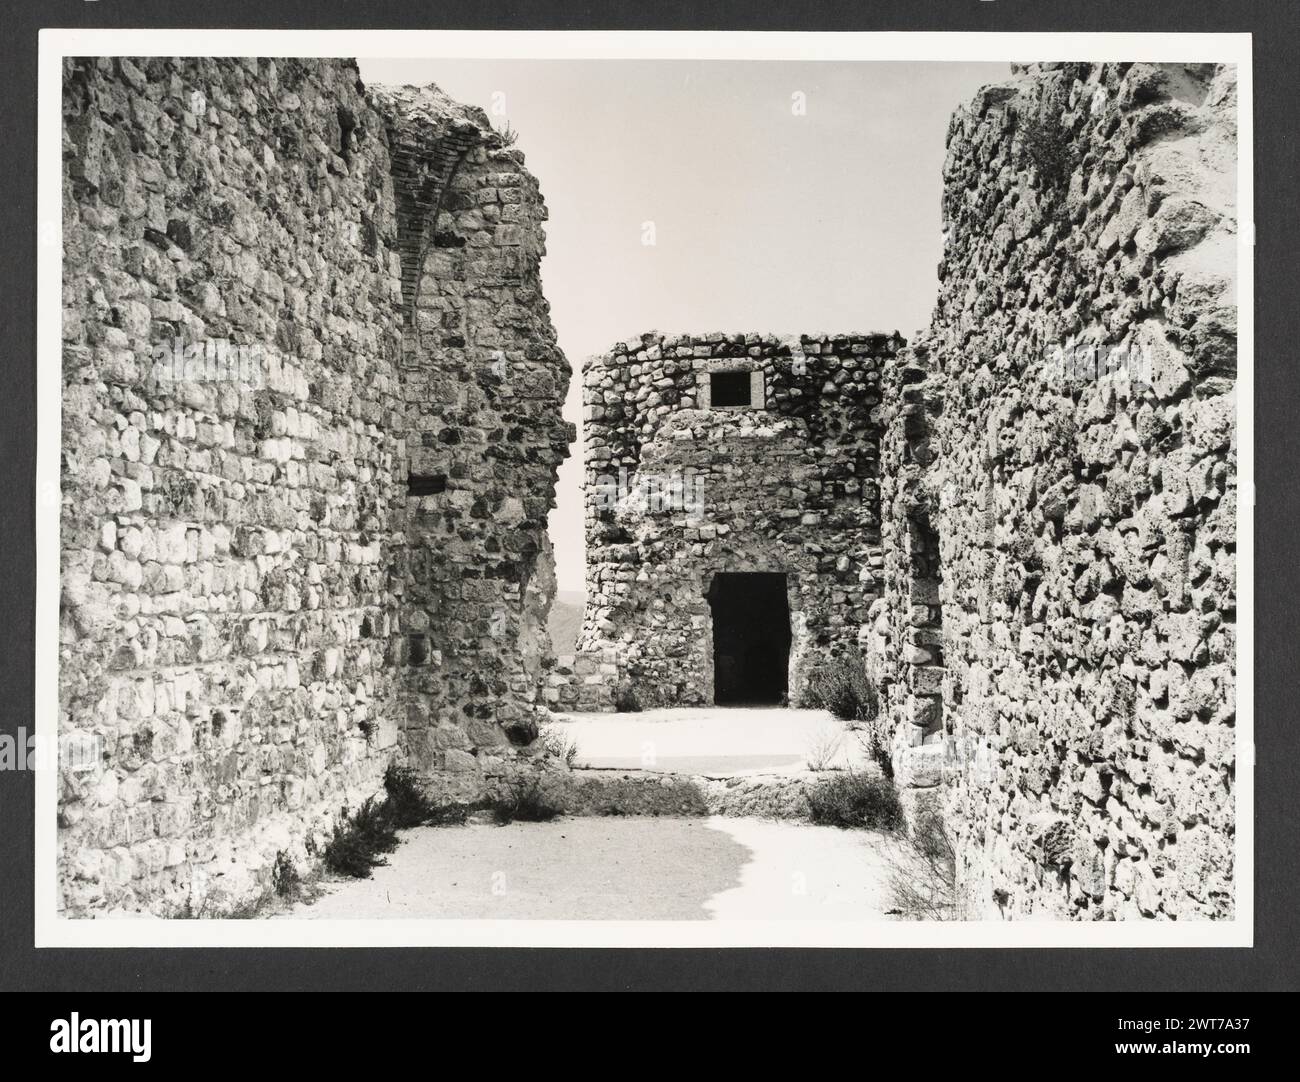 Lazio Frosinone Roccasecca Castello. Hutzel, Max 1960-1990 Medieval: Architecture. Some walls and towers remain of this building in the medieval quarter. Most of the structure was destroyed in WWI. German-born photographer and scholar Max Hutzel (1911-1988) photographed in Italy from the early 1960s until his death. The result of this project, referred to by Hutzel as Foto Arte Minore, is thorough documentation of art historical development in Italy up to the 18th century, including objects of the Etruscans and the Romans, as well as early Medieval, Romanesque, Gothic, Renaissance and Baroque Stock Photo